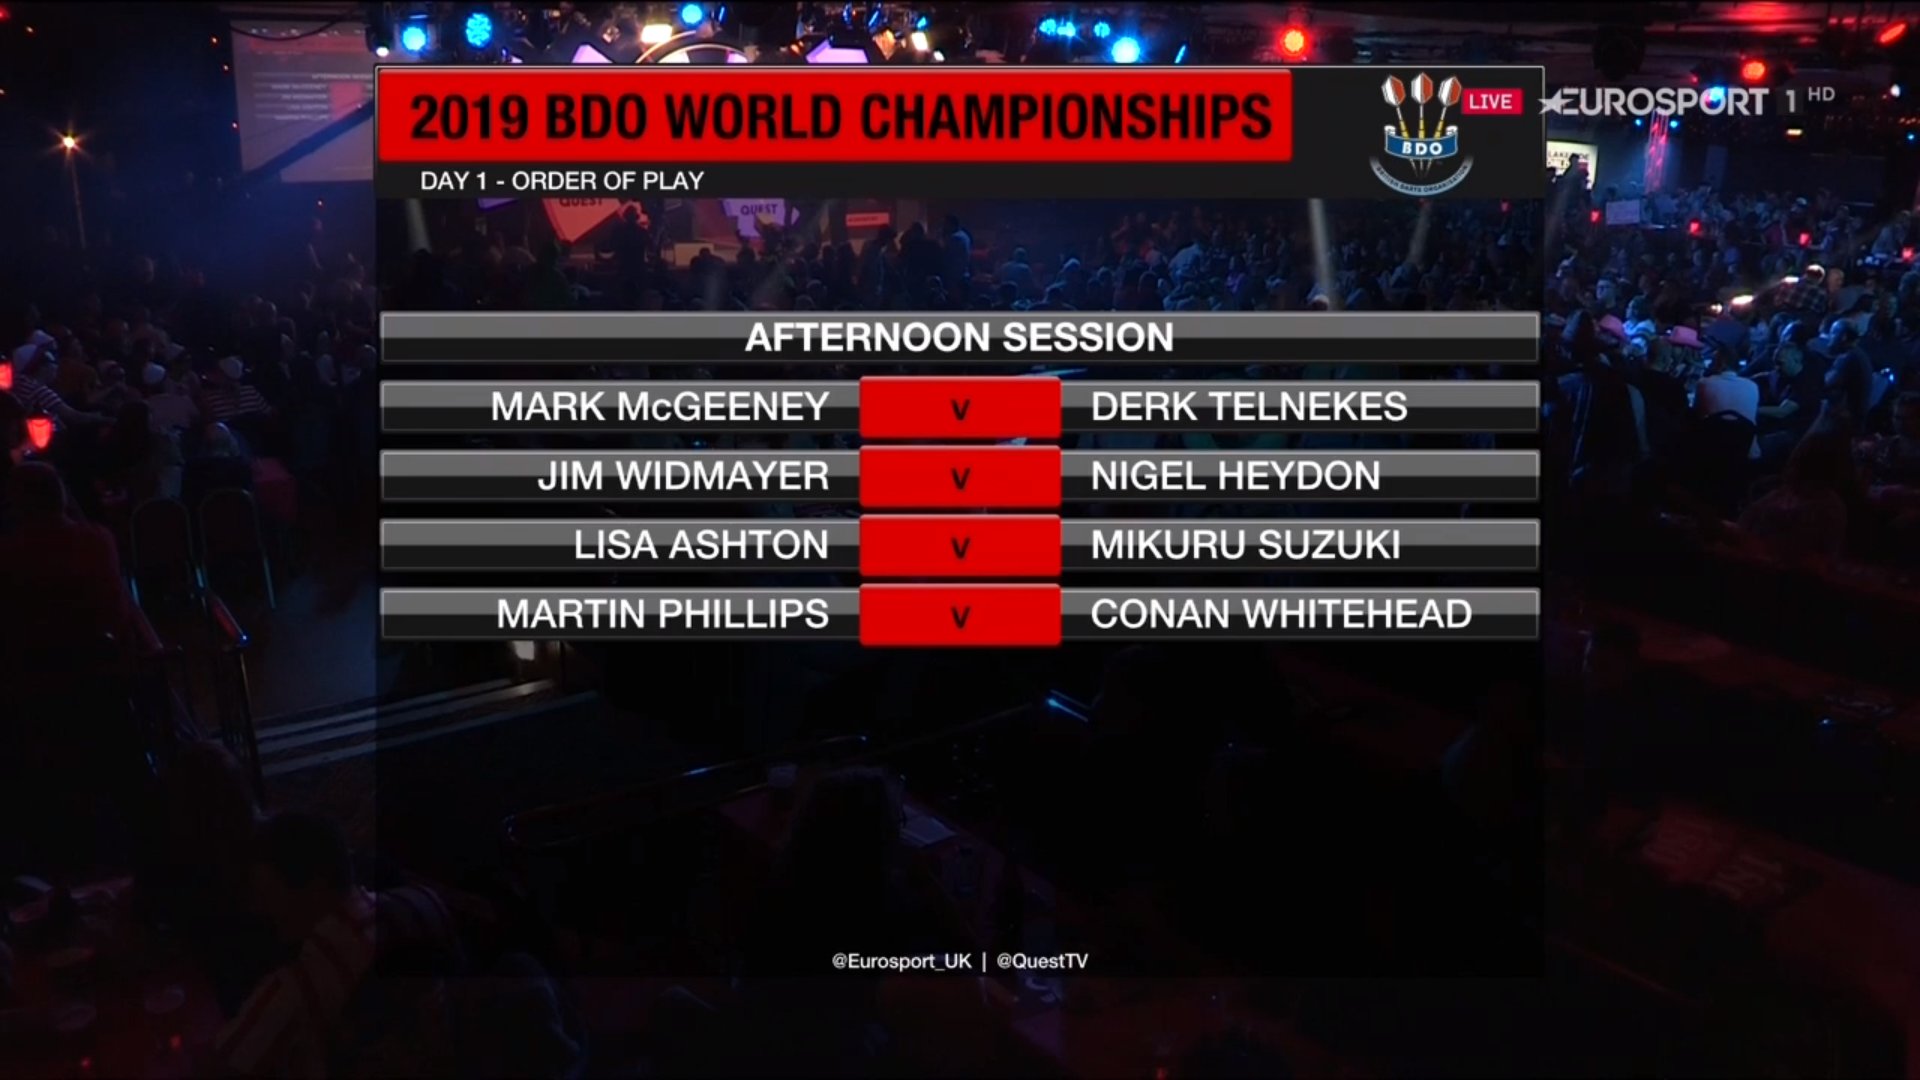 Eurosport on Twitter: ARE LIVE! Tune into Eurosport 1 now for Day of The Lakeside World Professional Darts Championships 🎯 Here's the line-up for afternoon session #LakesideDarts #BDOWorldDarts https://t.co/3WaaOAeows" /